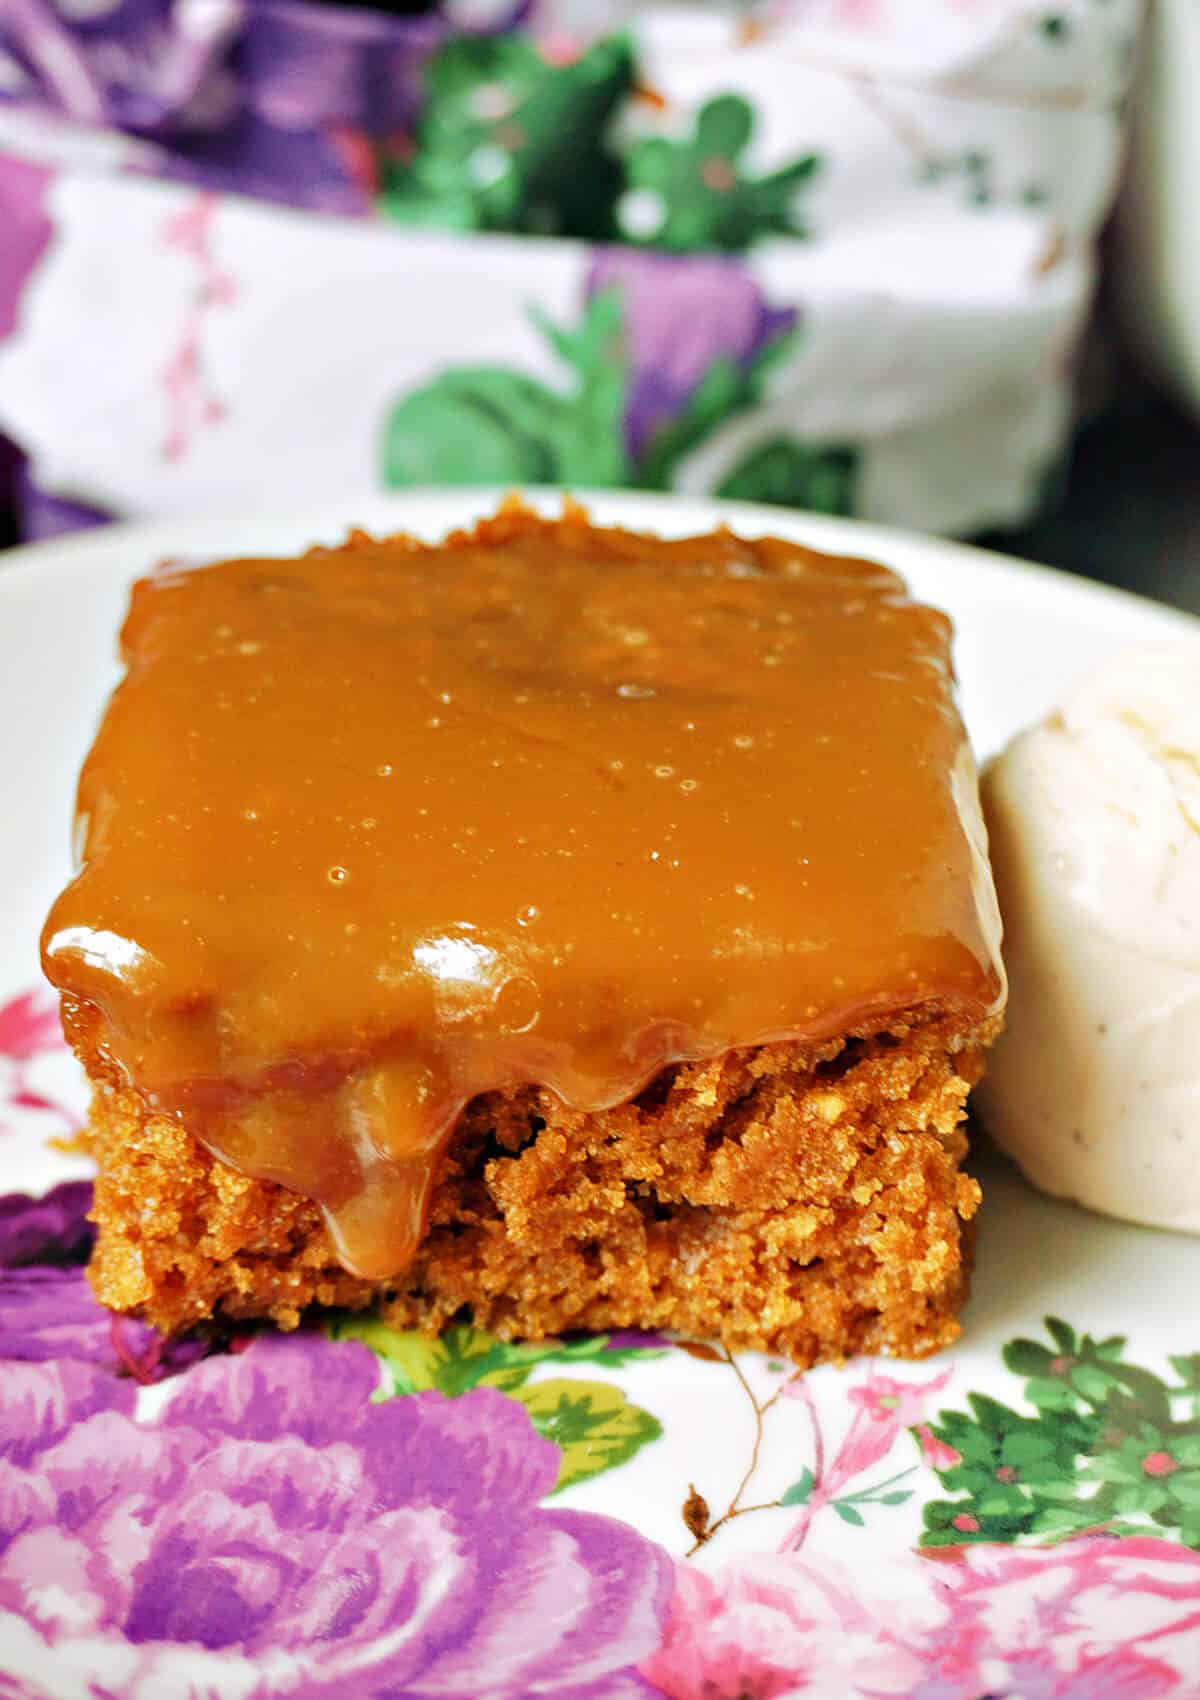 A slice of sticky toffee pudding on a plate.